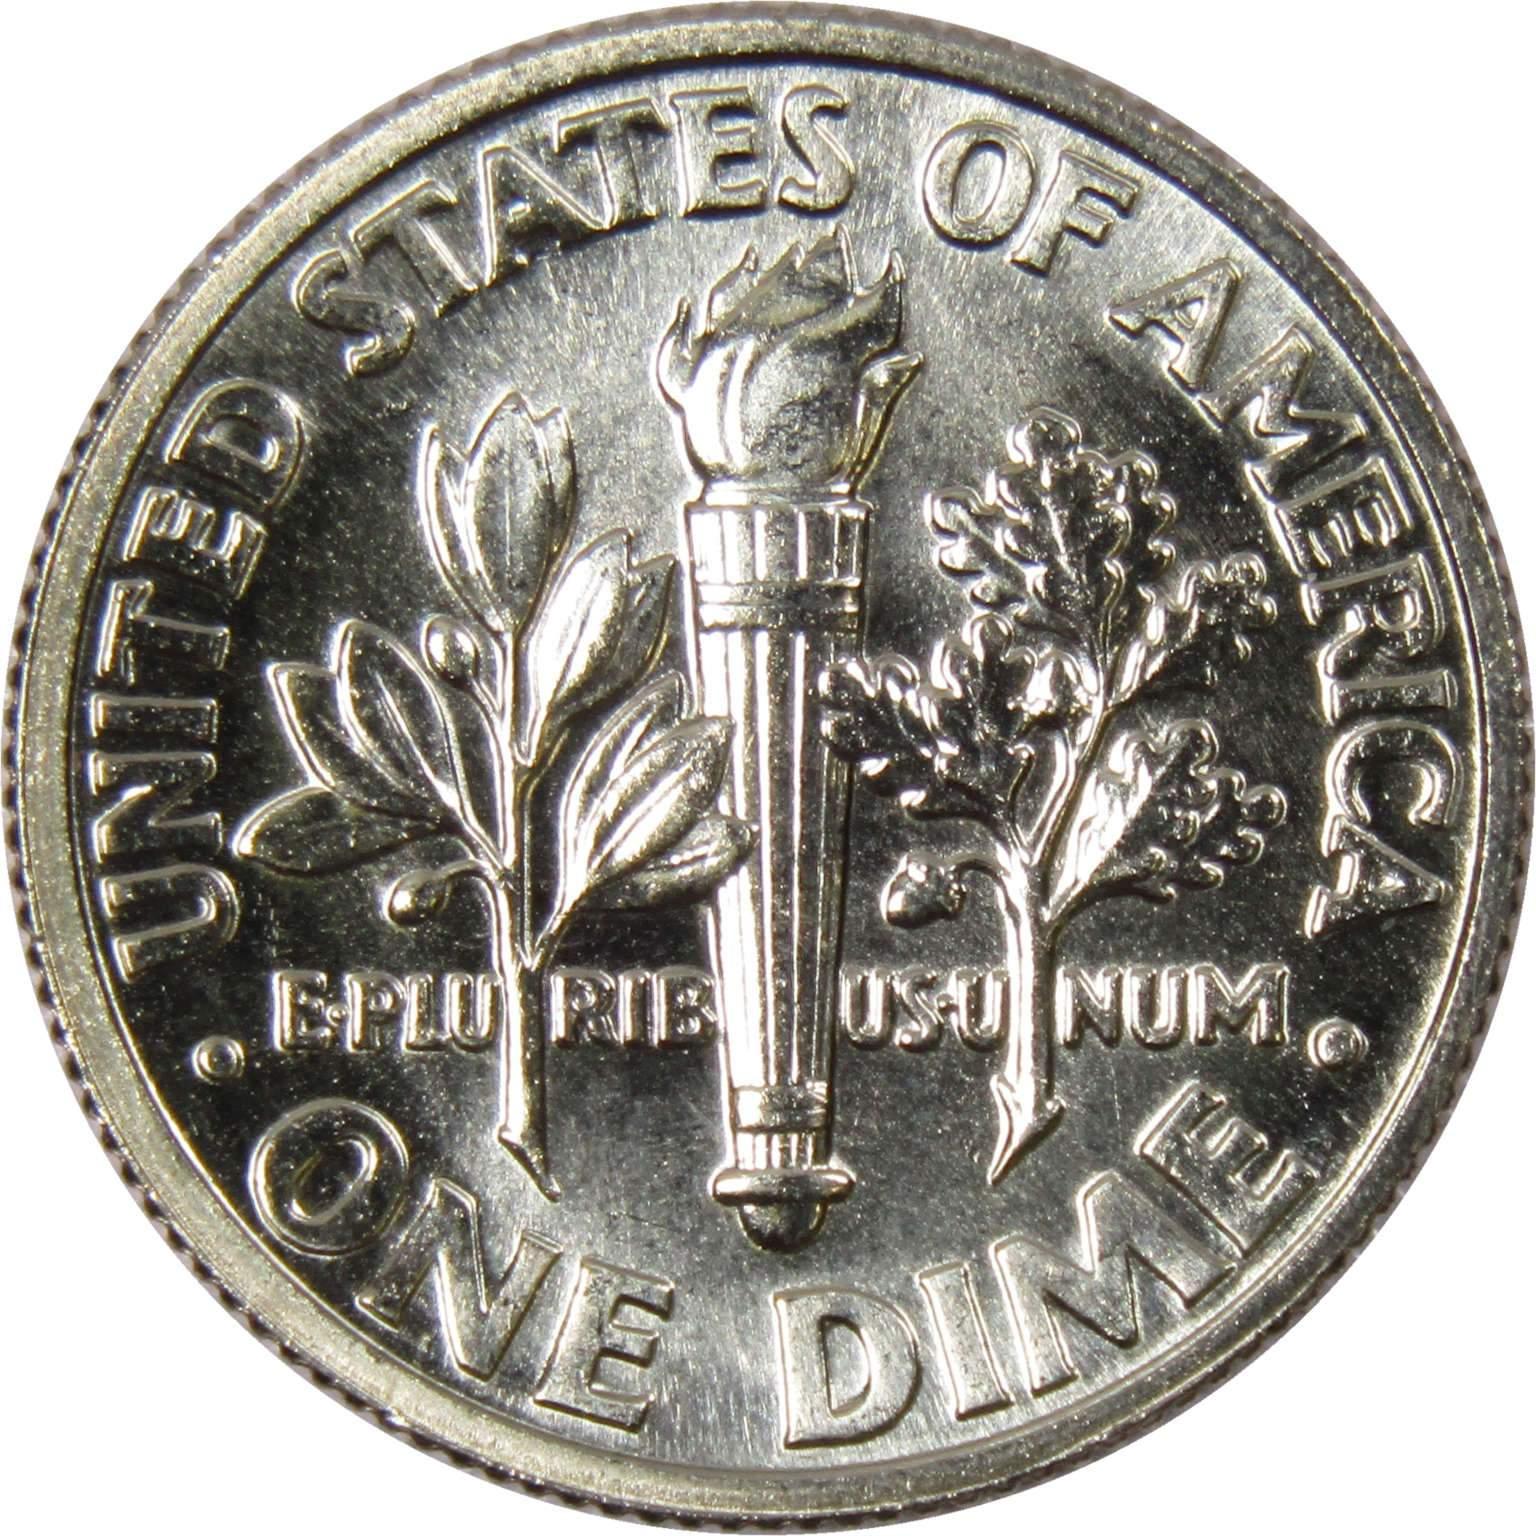 1995 P Roosevelt Dime BU Uncirculated Mint State 10c US Coin Collectible